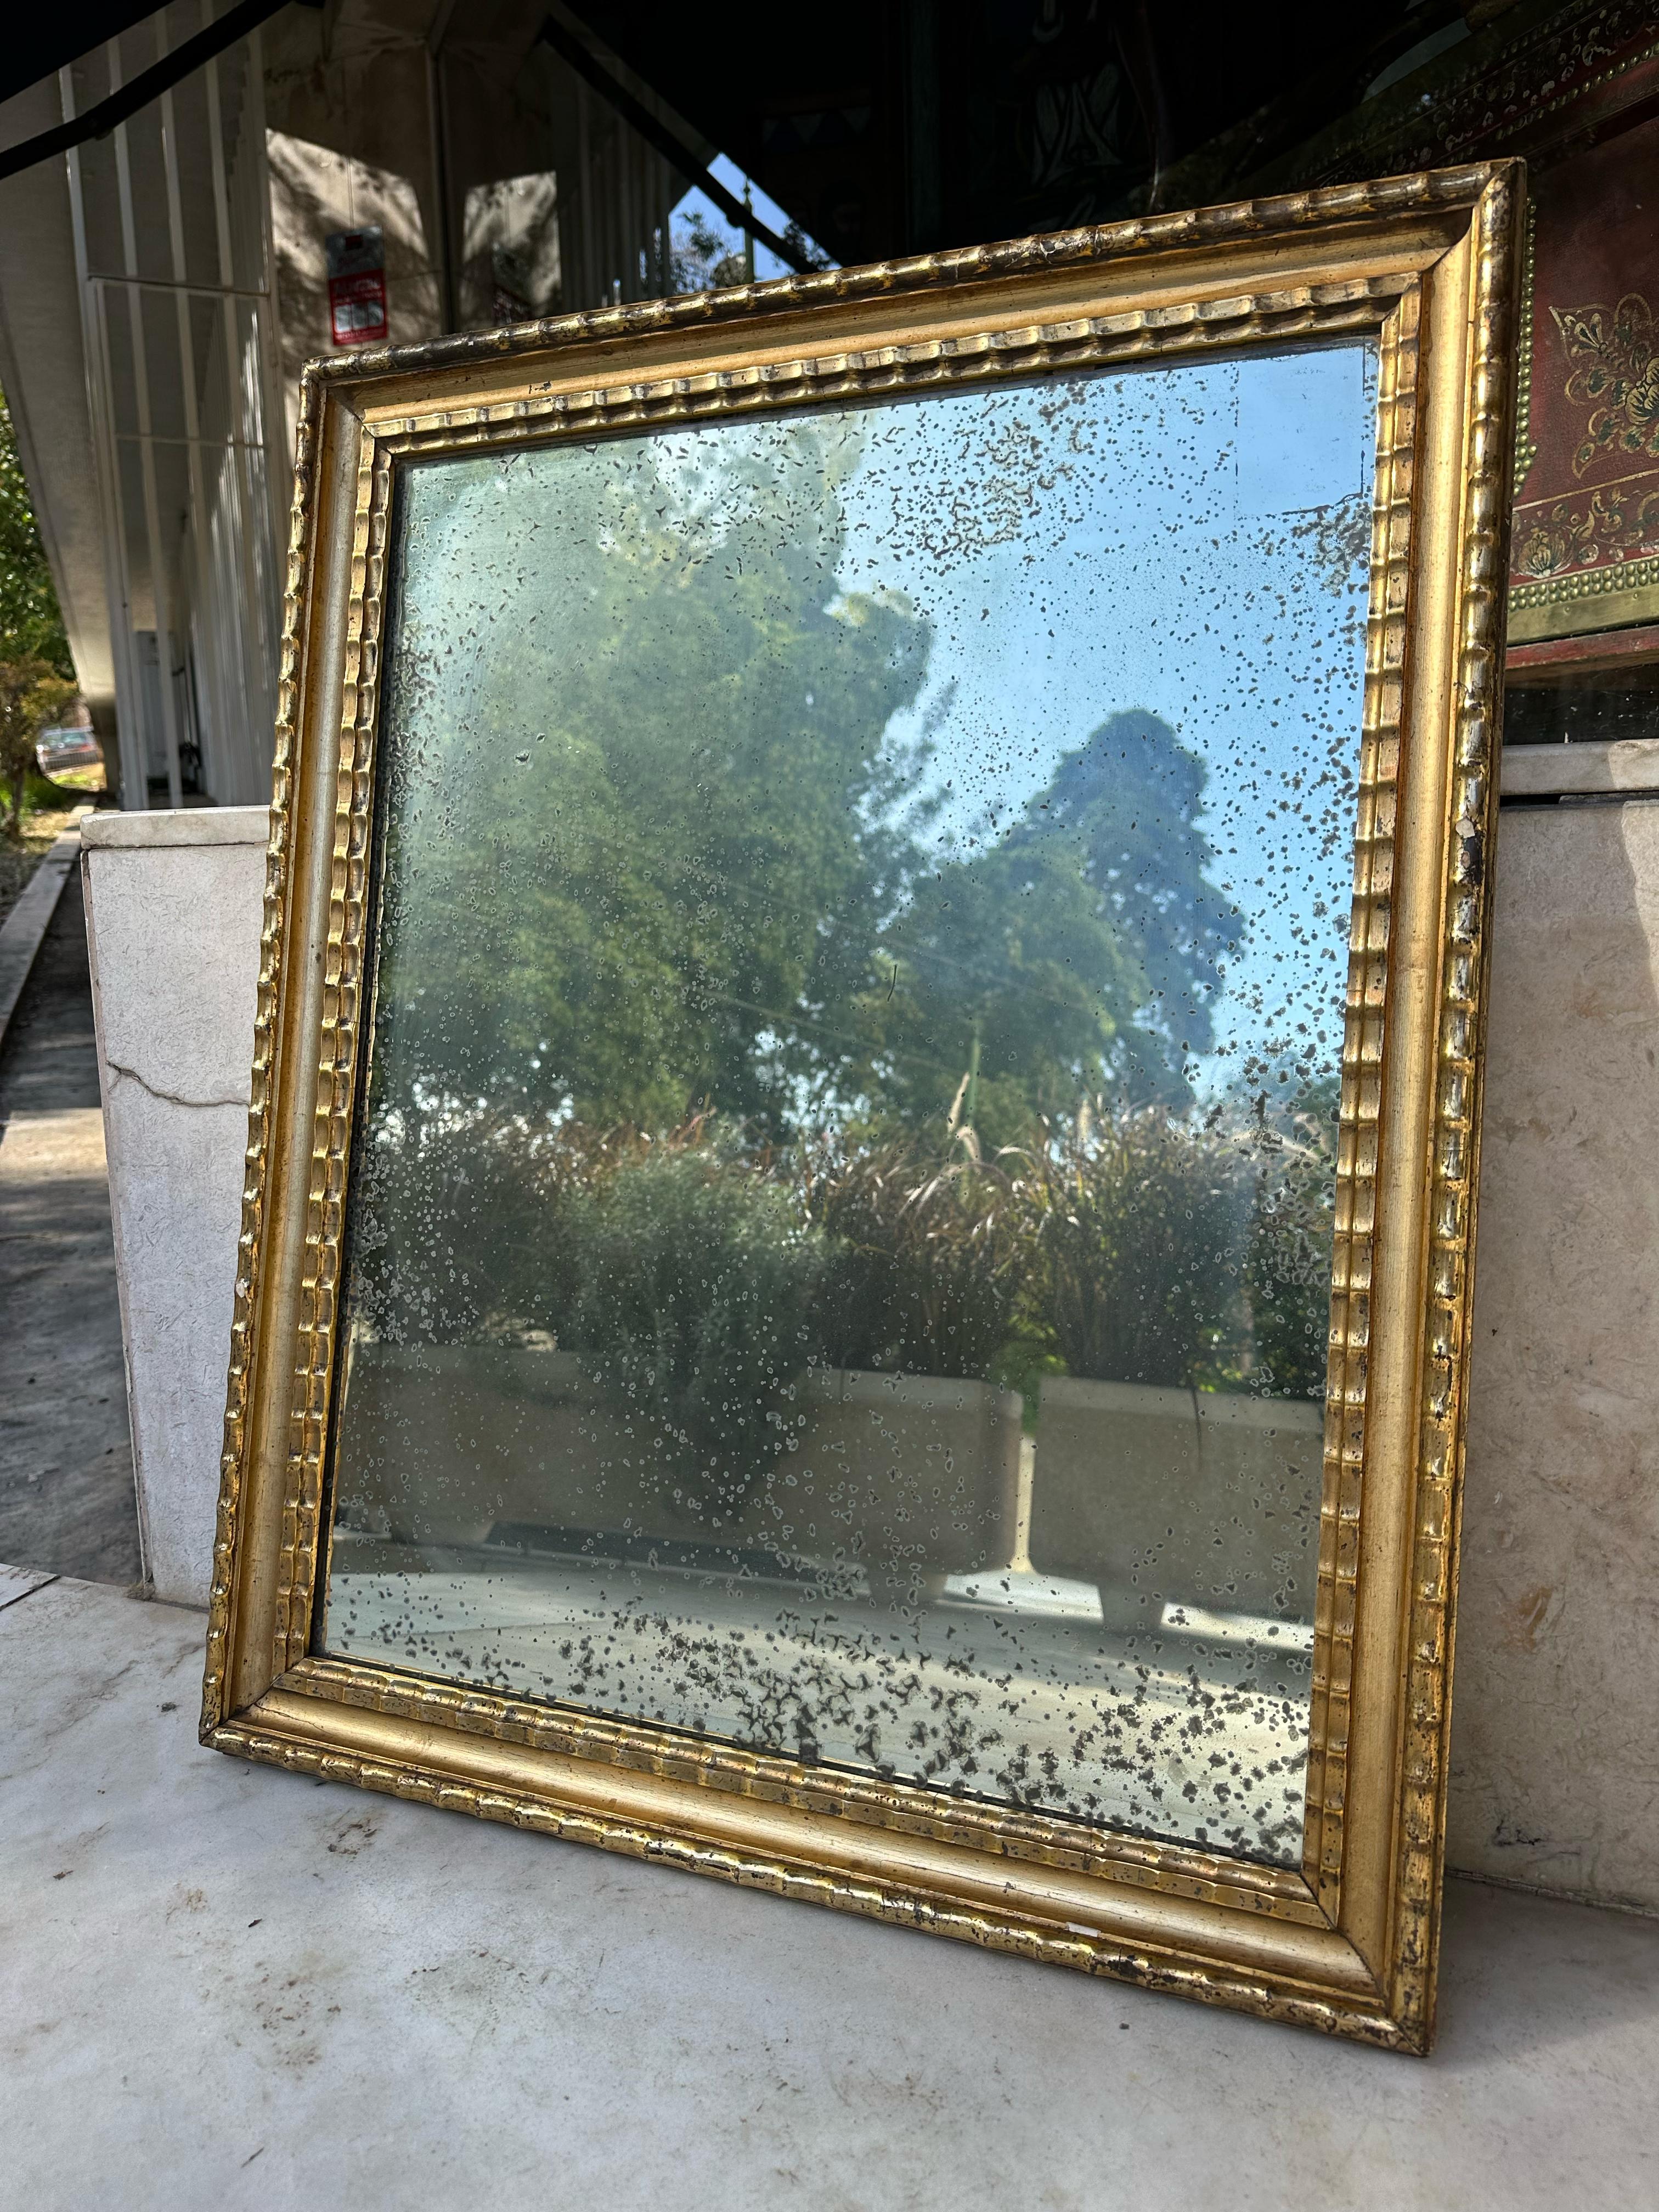 European Made, Late XX Century Brunid Silver Leaf Mirror

This is an exquisite piece exuding timeless elegance. Crafted with precision and artistry, its ornate frame boasts intricate detailing, reminiscent of the neoclassical era. The silver leaf